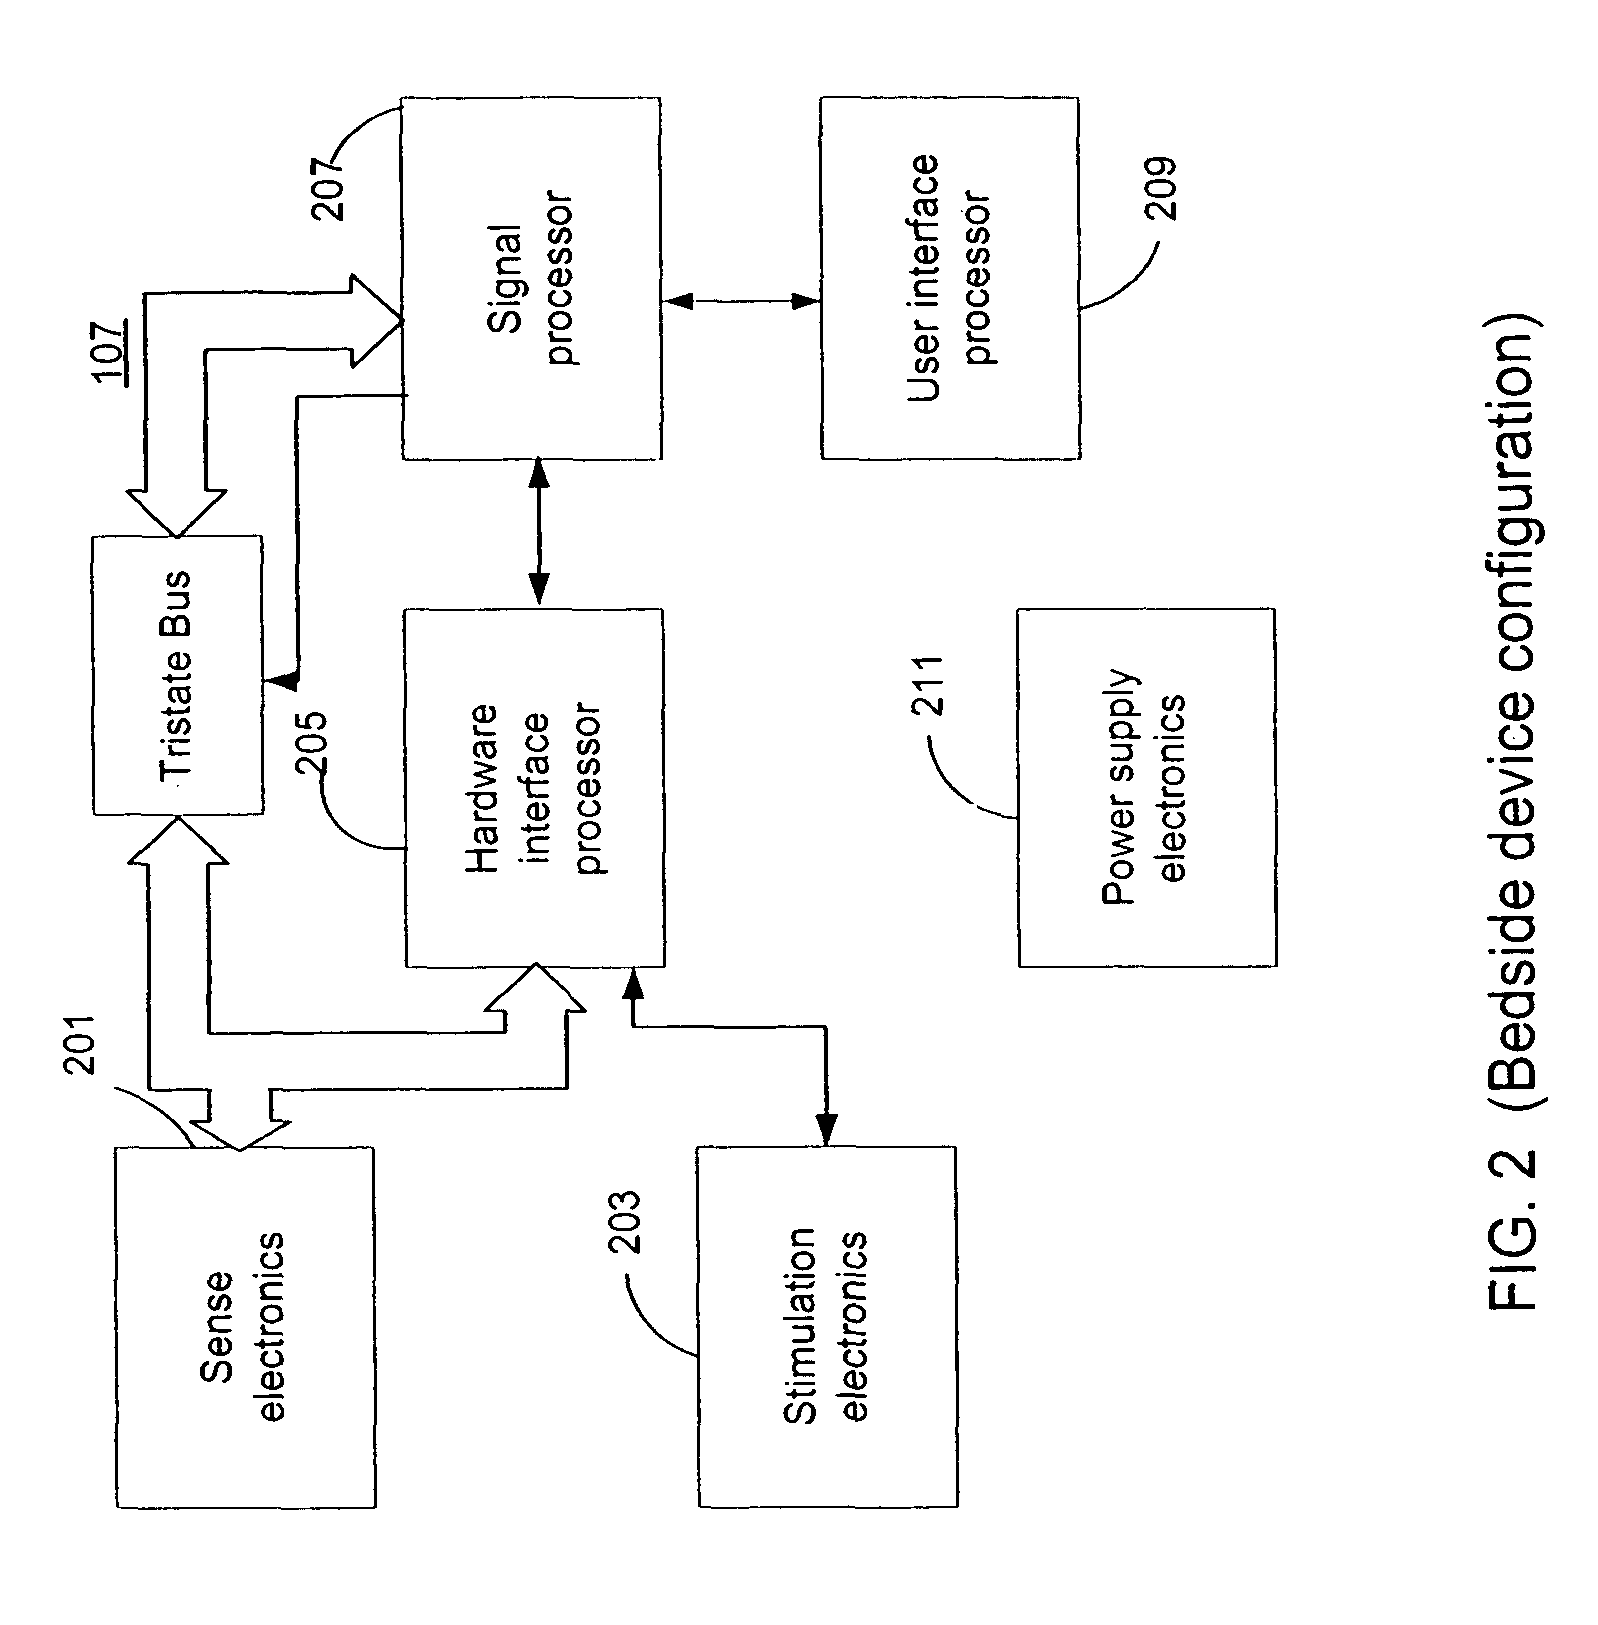 Configuring and testing treatment therapy parameters for a medical device system